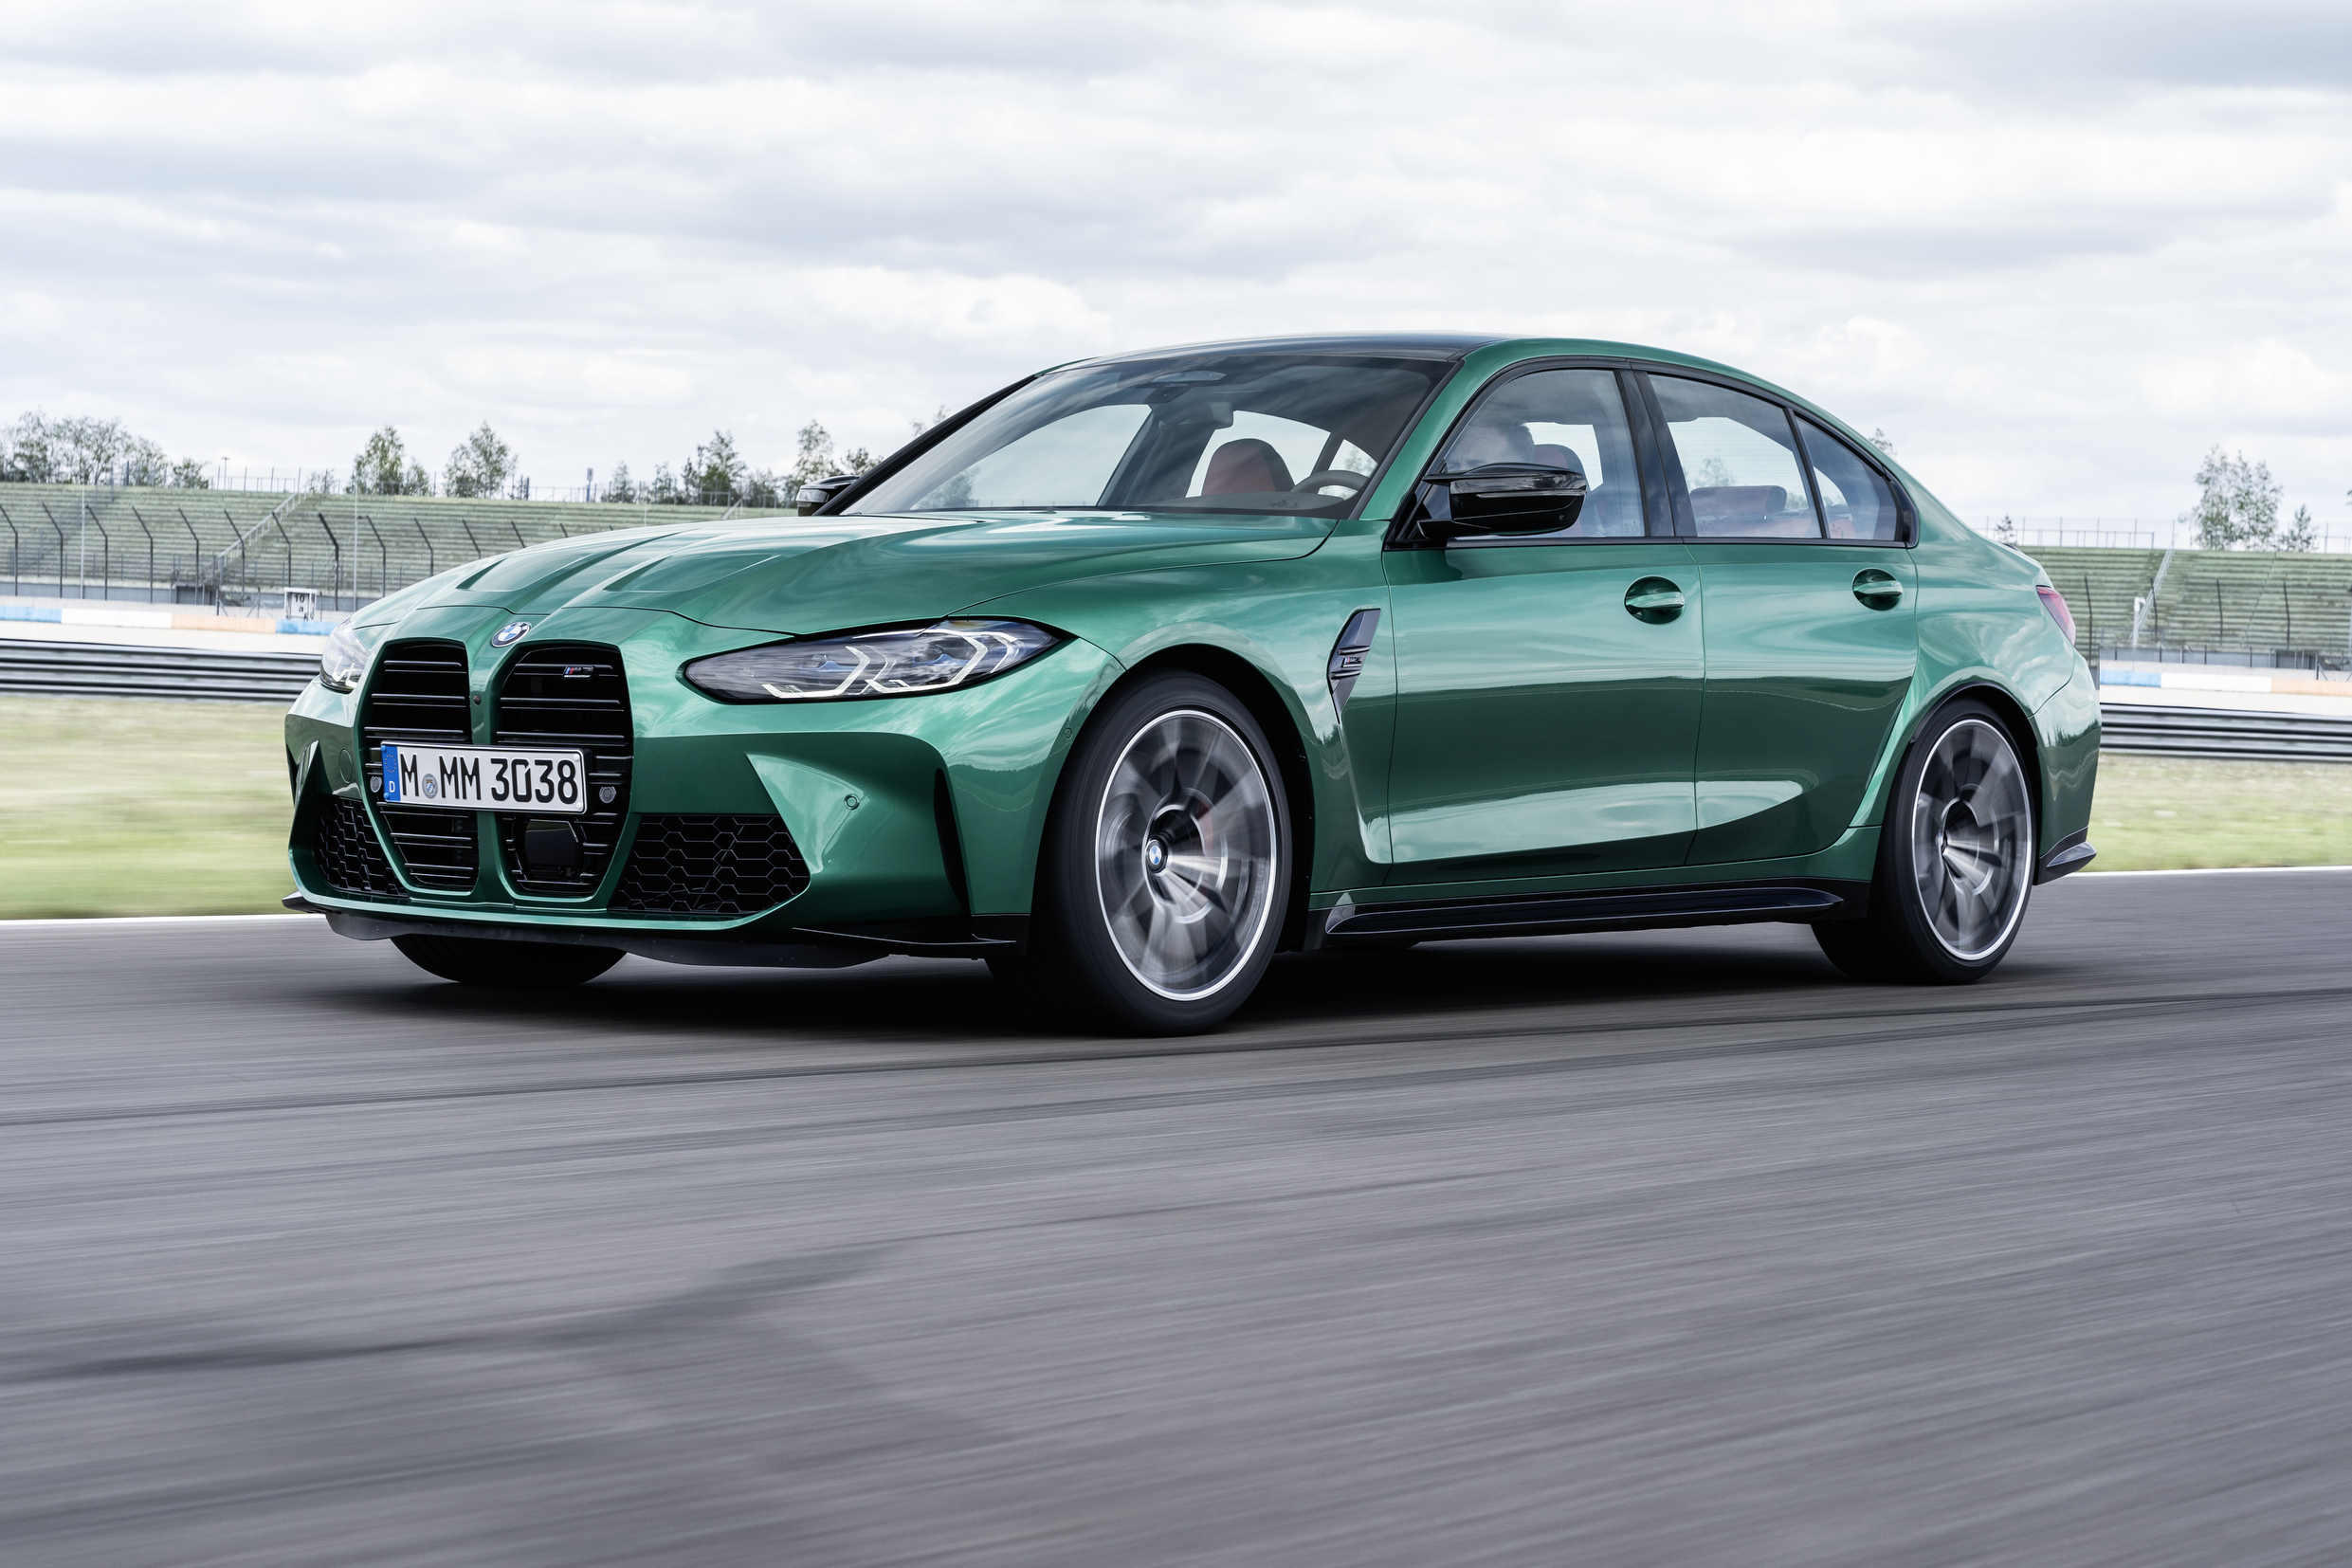 An emerald green 2022 BMW M3 sedan shot from the front 3/4 angle on a race track